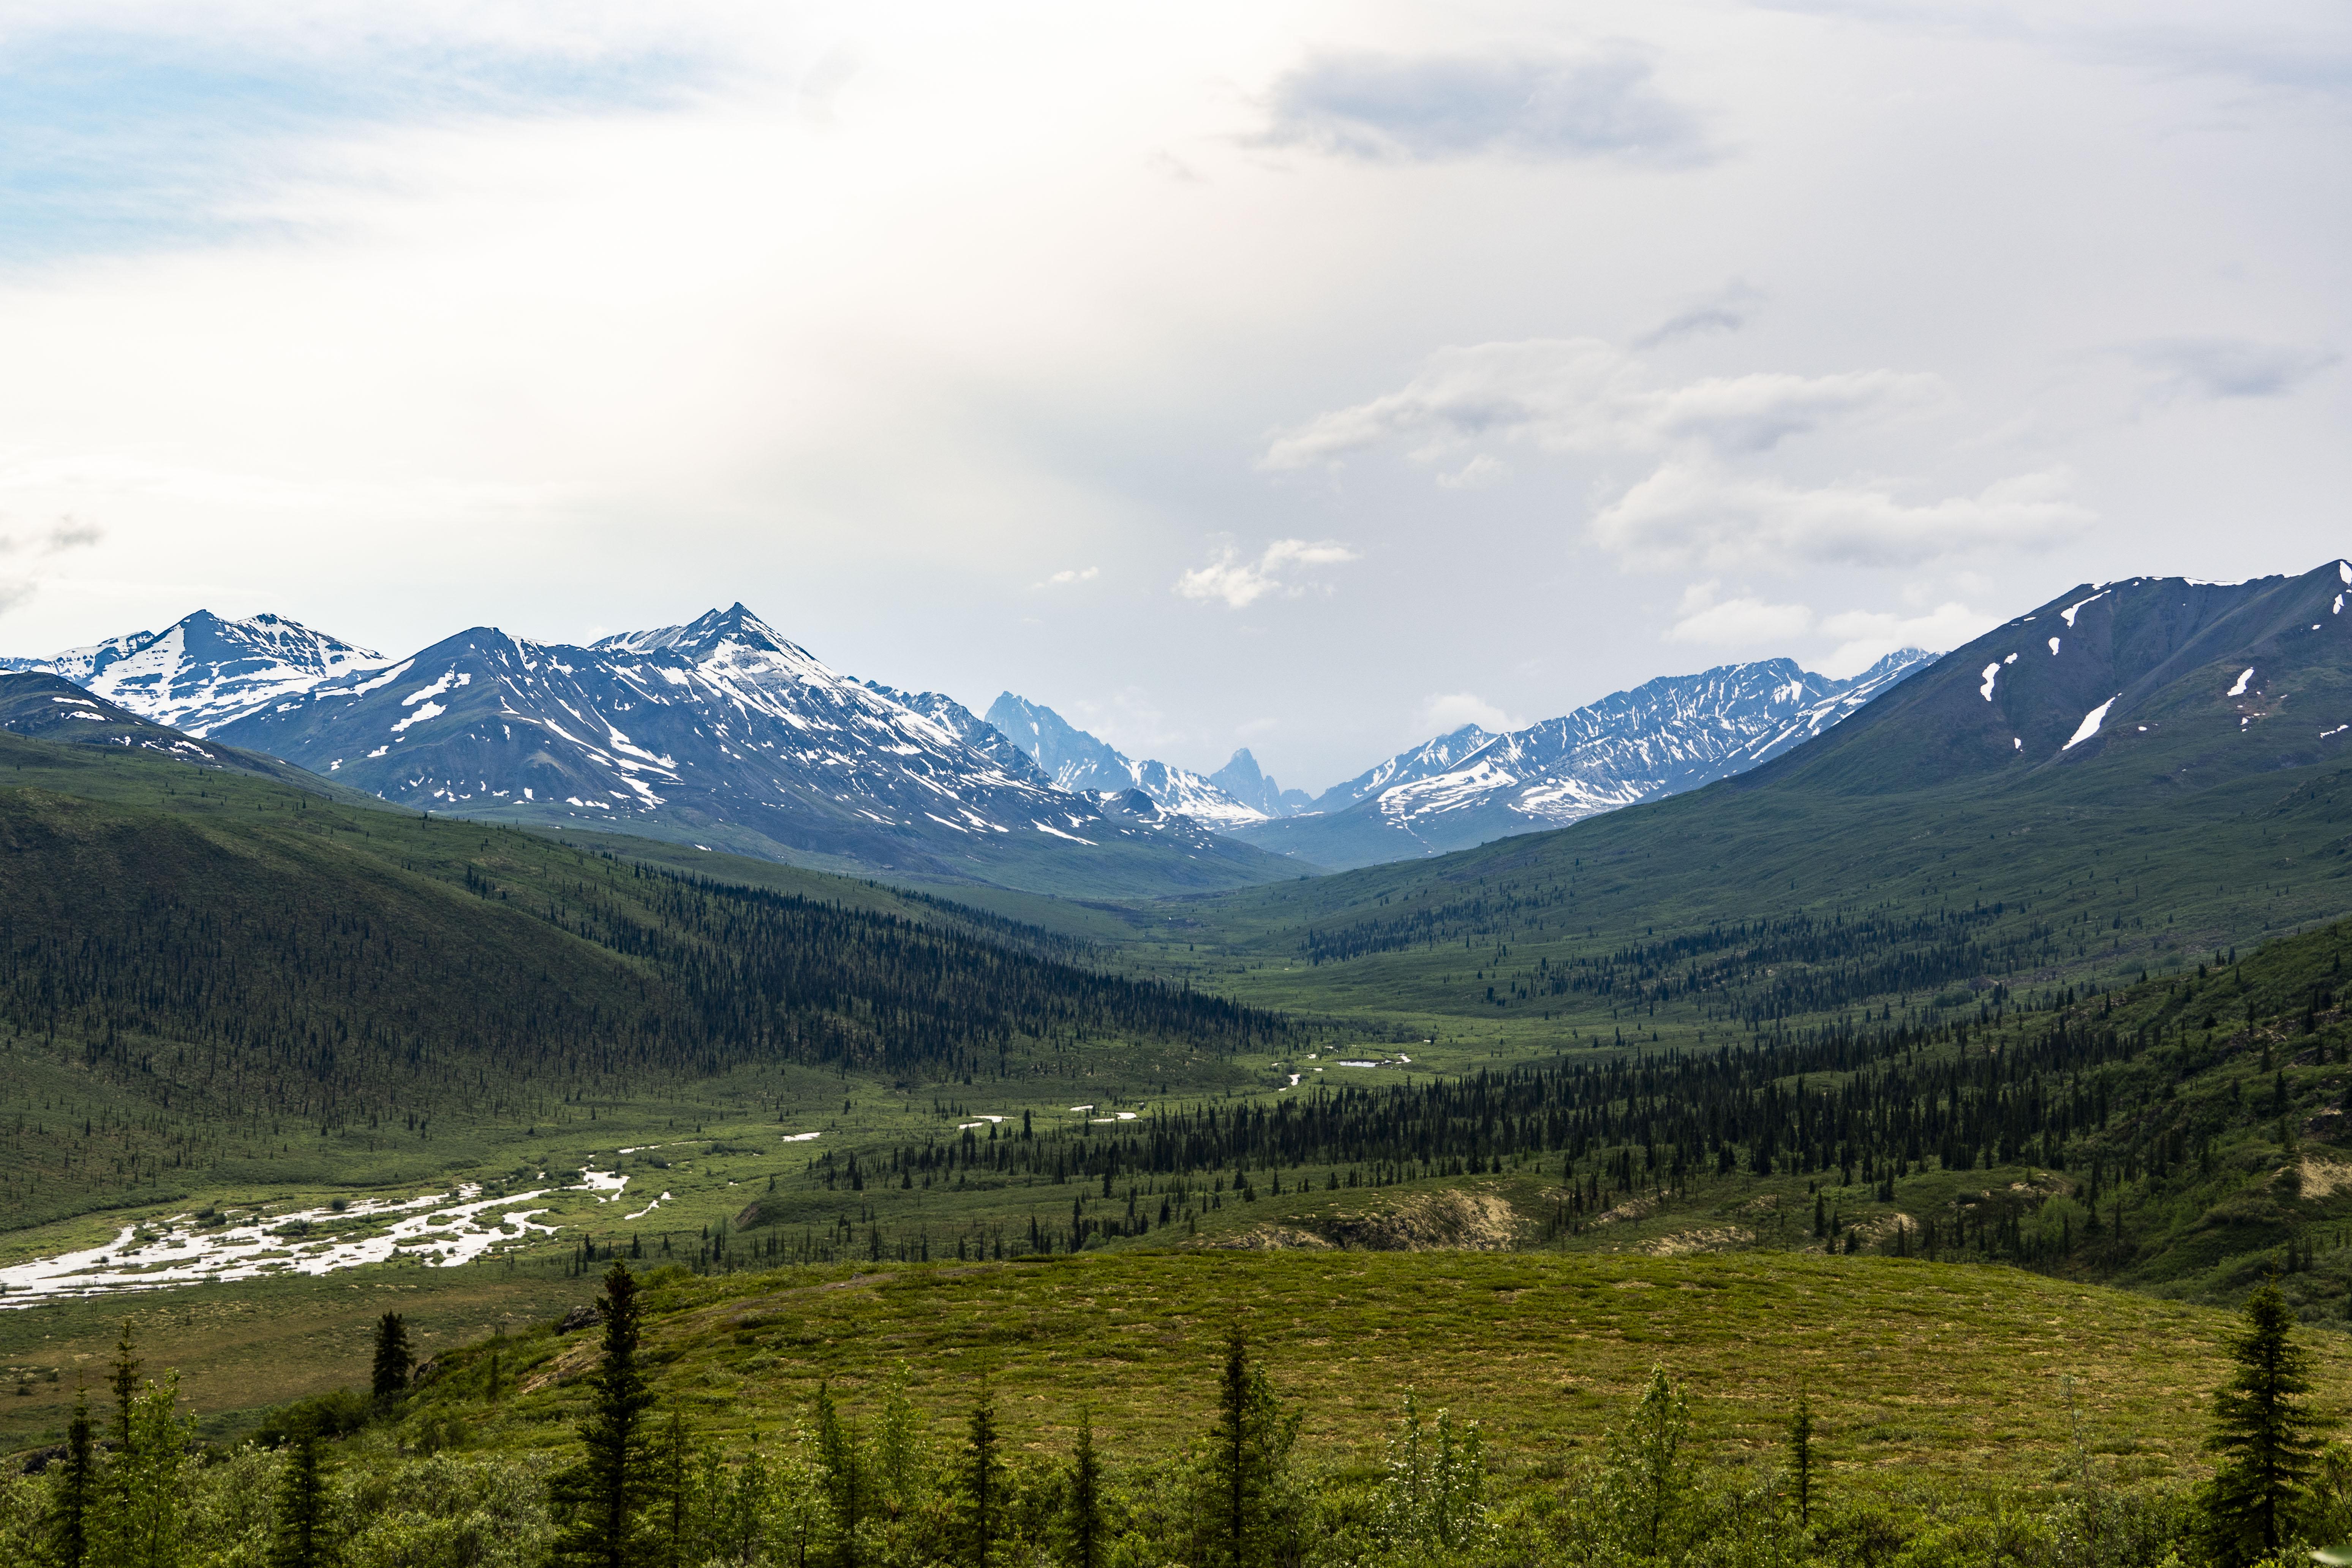 Nature Landscape Snow Mountains Clouds Canada North America Field River Yukon Forest Mountain View 6192x4128